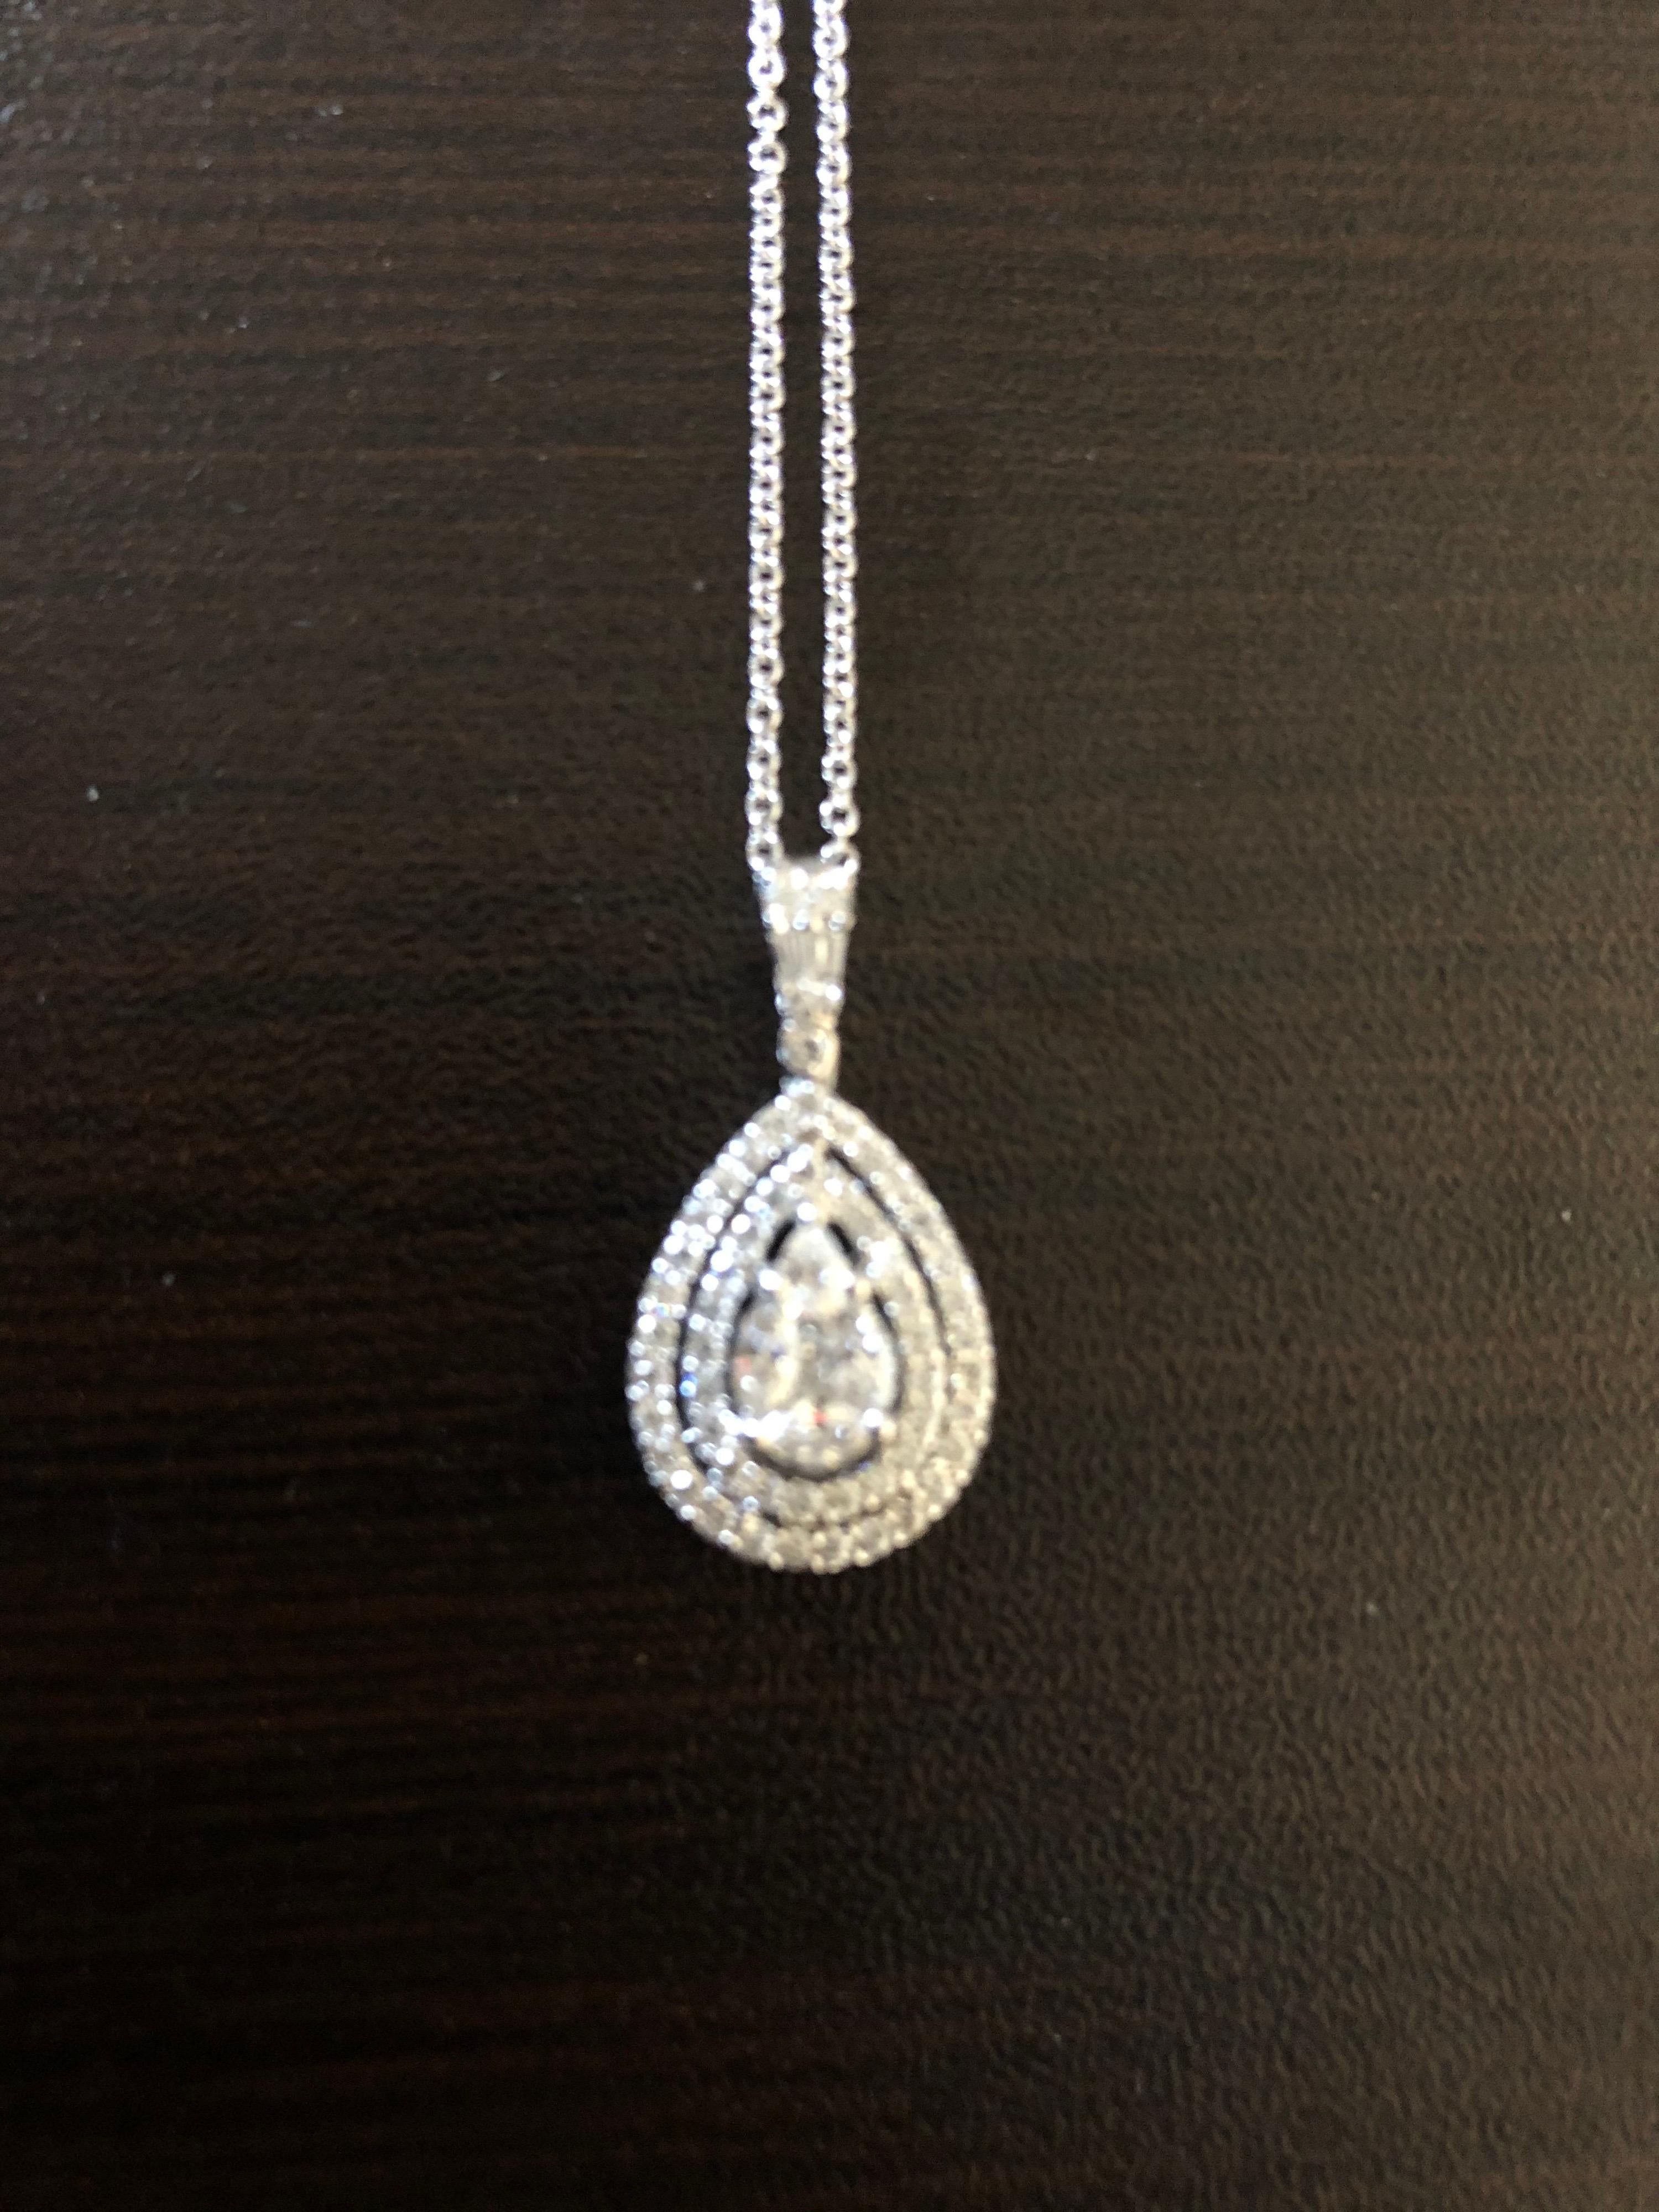 Pear shaped diamond pendant with double halo of round stones set in 18K white gold. The center is a princess in the middle with 4 marquise around it to create the illusion of a single pear diamond. The total carat weight of the pendant is 1.47. The